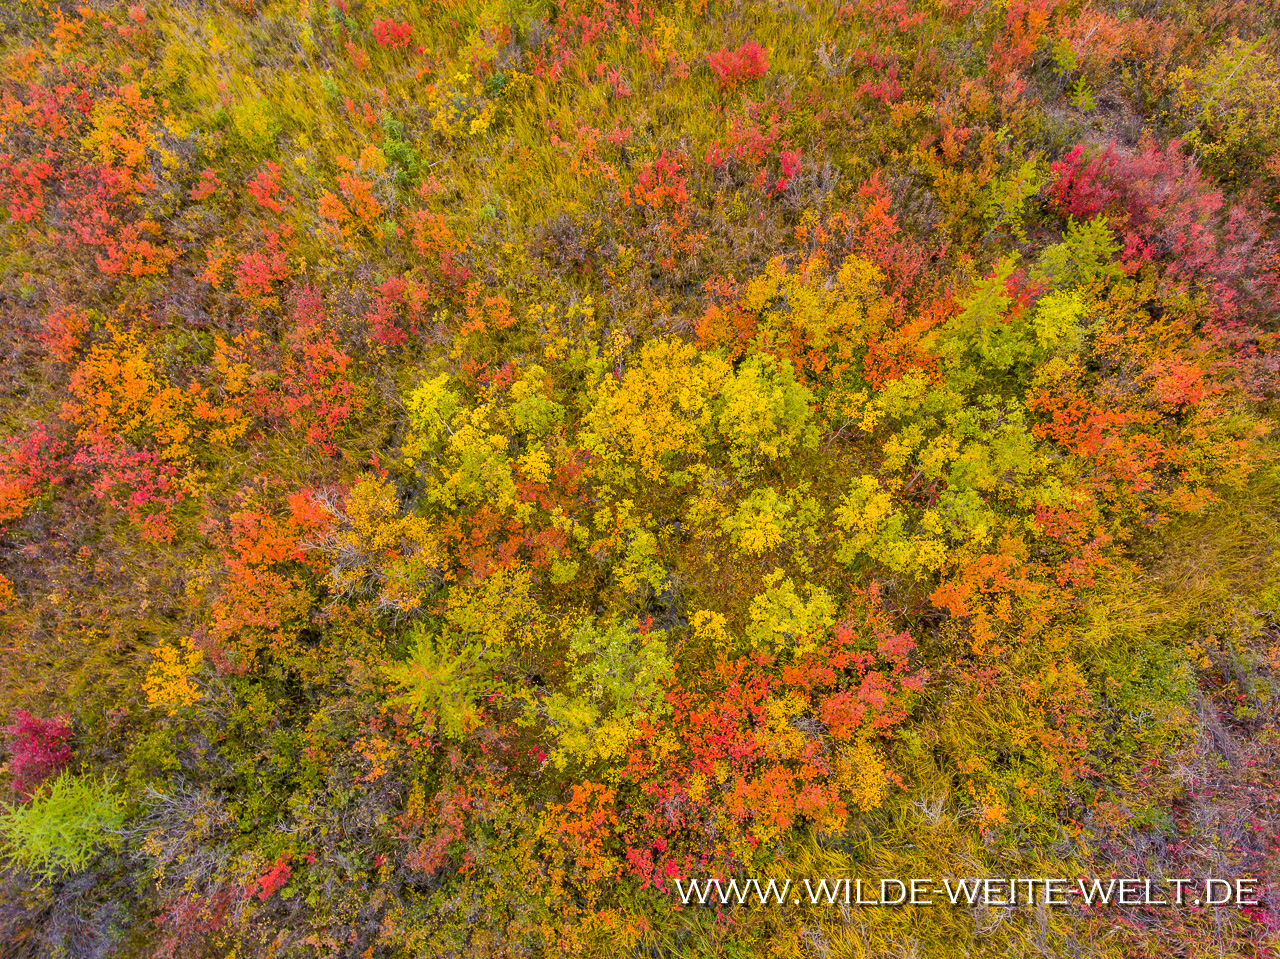 Tundra-in-Fall-Color-Flower-Springs-Lake-Trail-Stone-Mountain-Provincial-Park-Alaska-Highway-British-Columbia-78 Fall Color / Herbstfärbung in den Northwest Territories